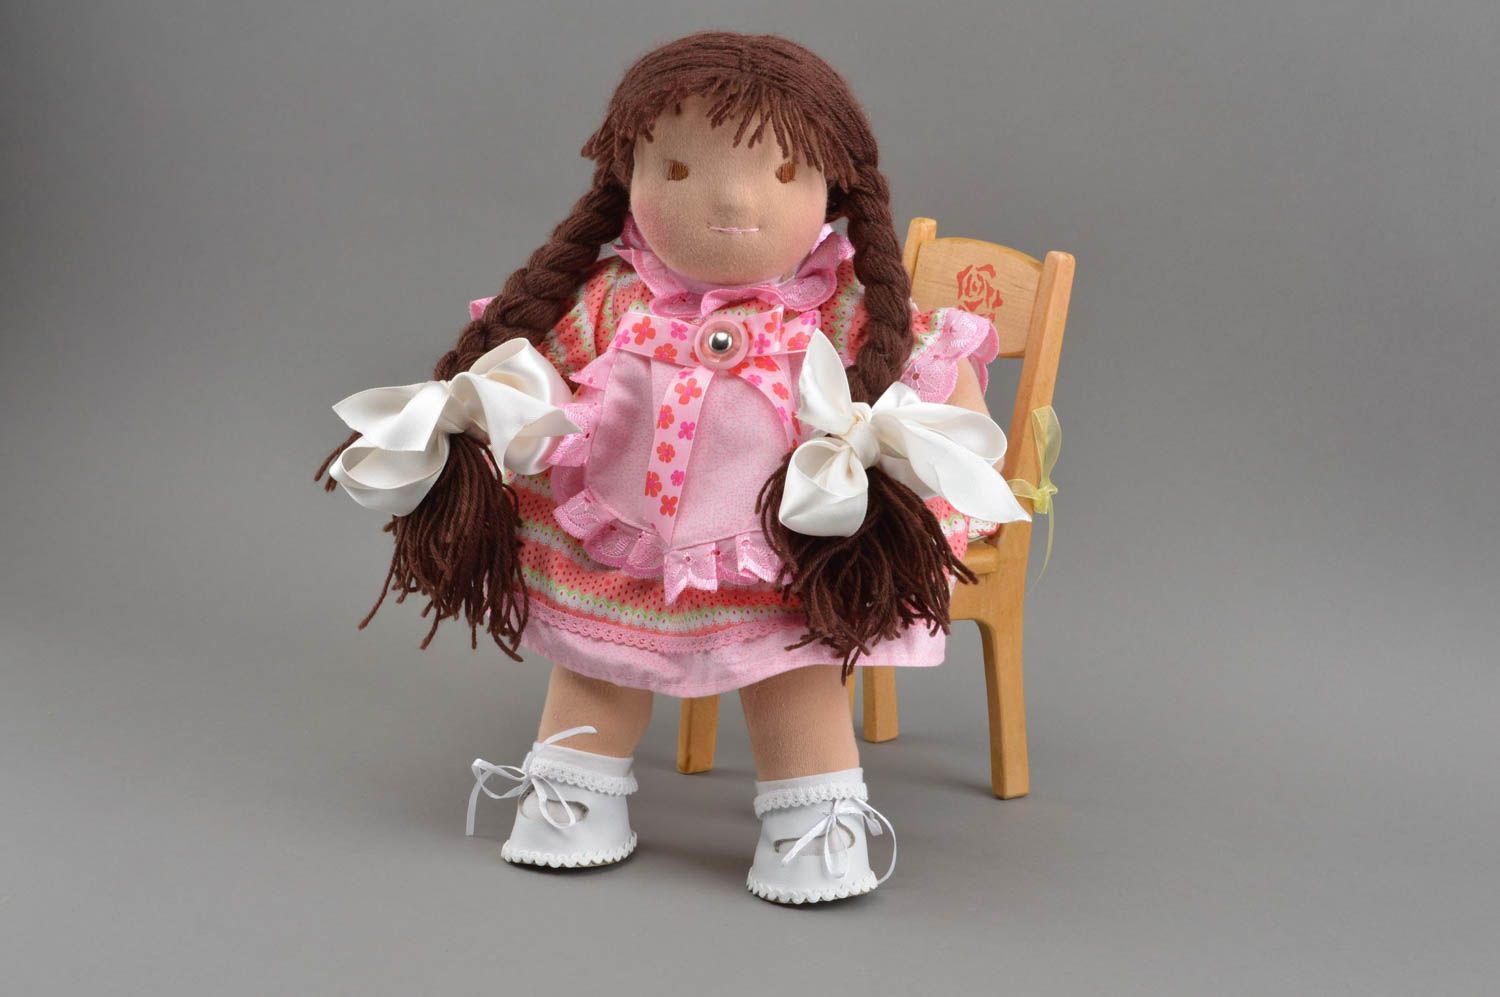 Designer doll handcrafted soft toy fabric stuffed toy for children and decor photo 2